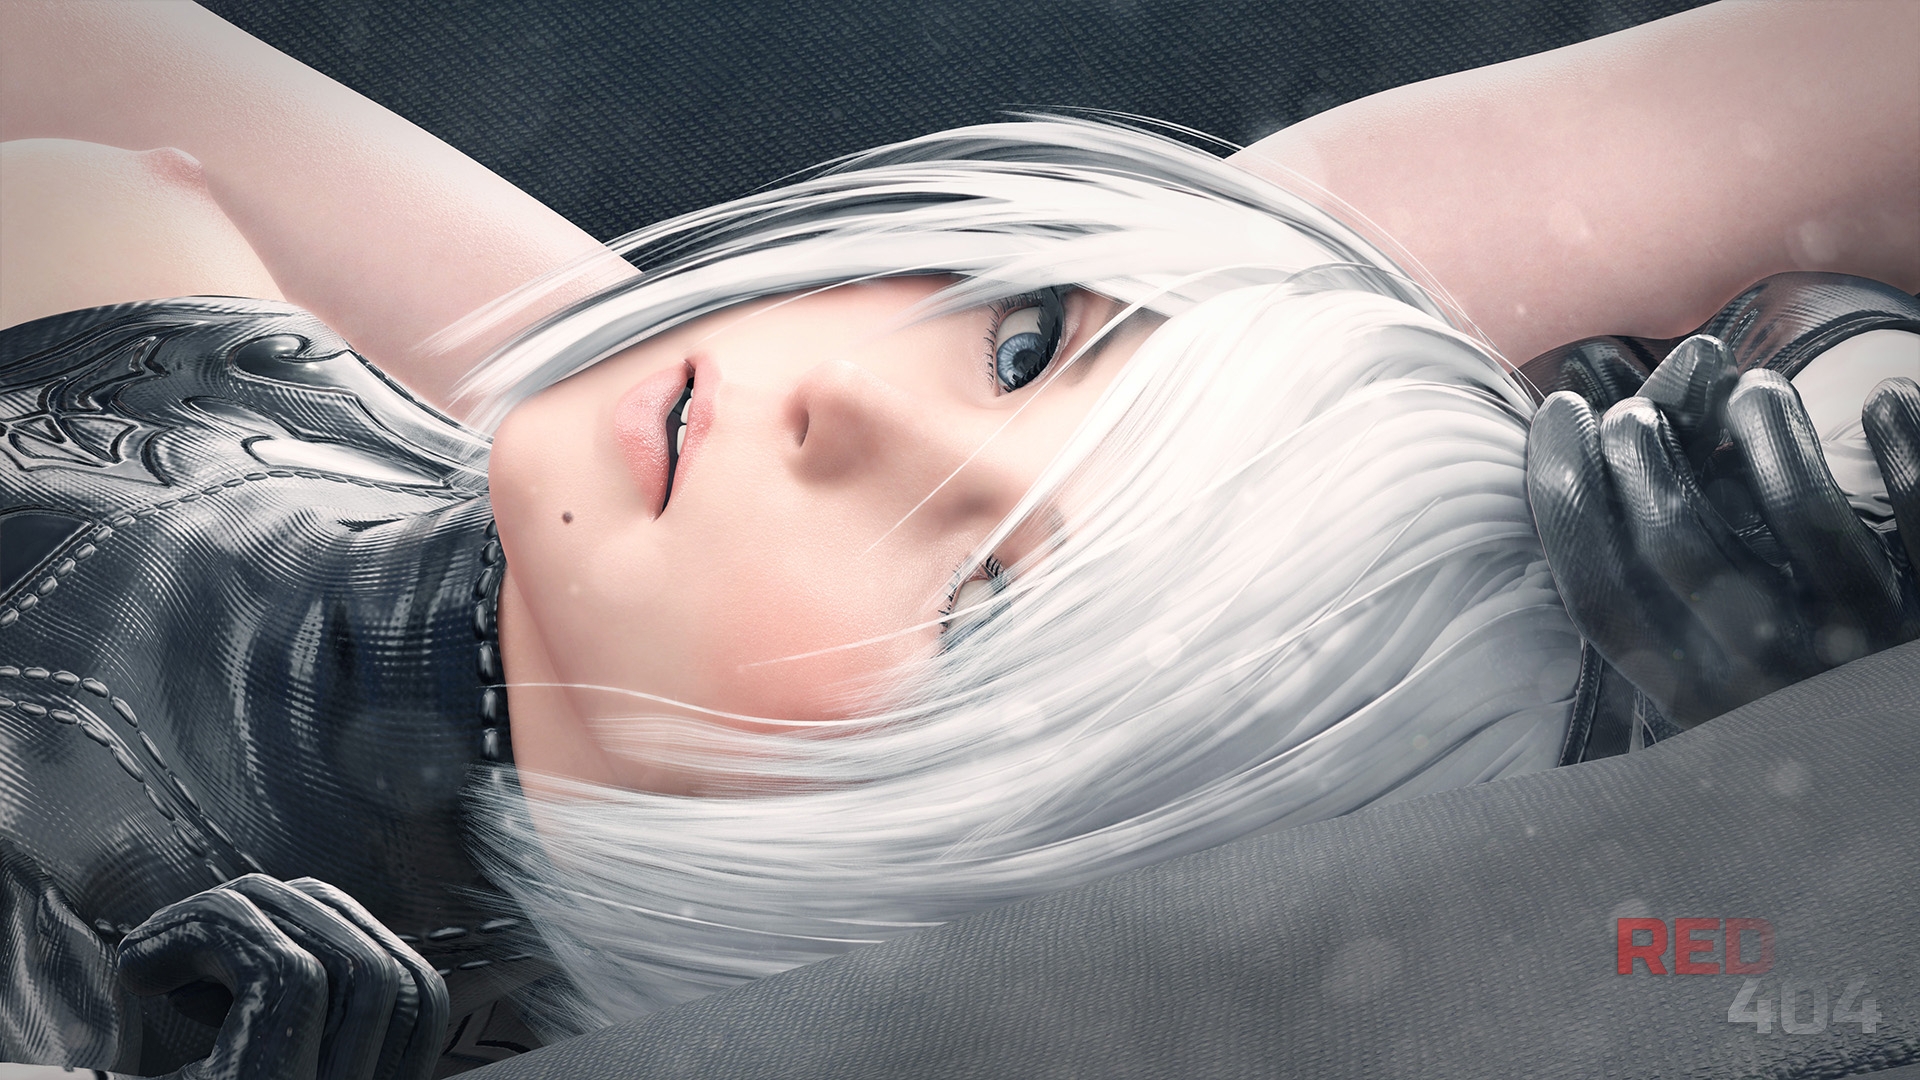 2B couch Yorha2b Nier Automata Nier (series) Pussy Pink Pussy Pose 3d Girls Blue Eyes White Hair 2